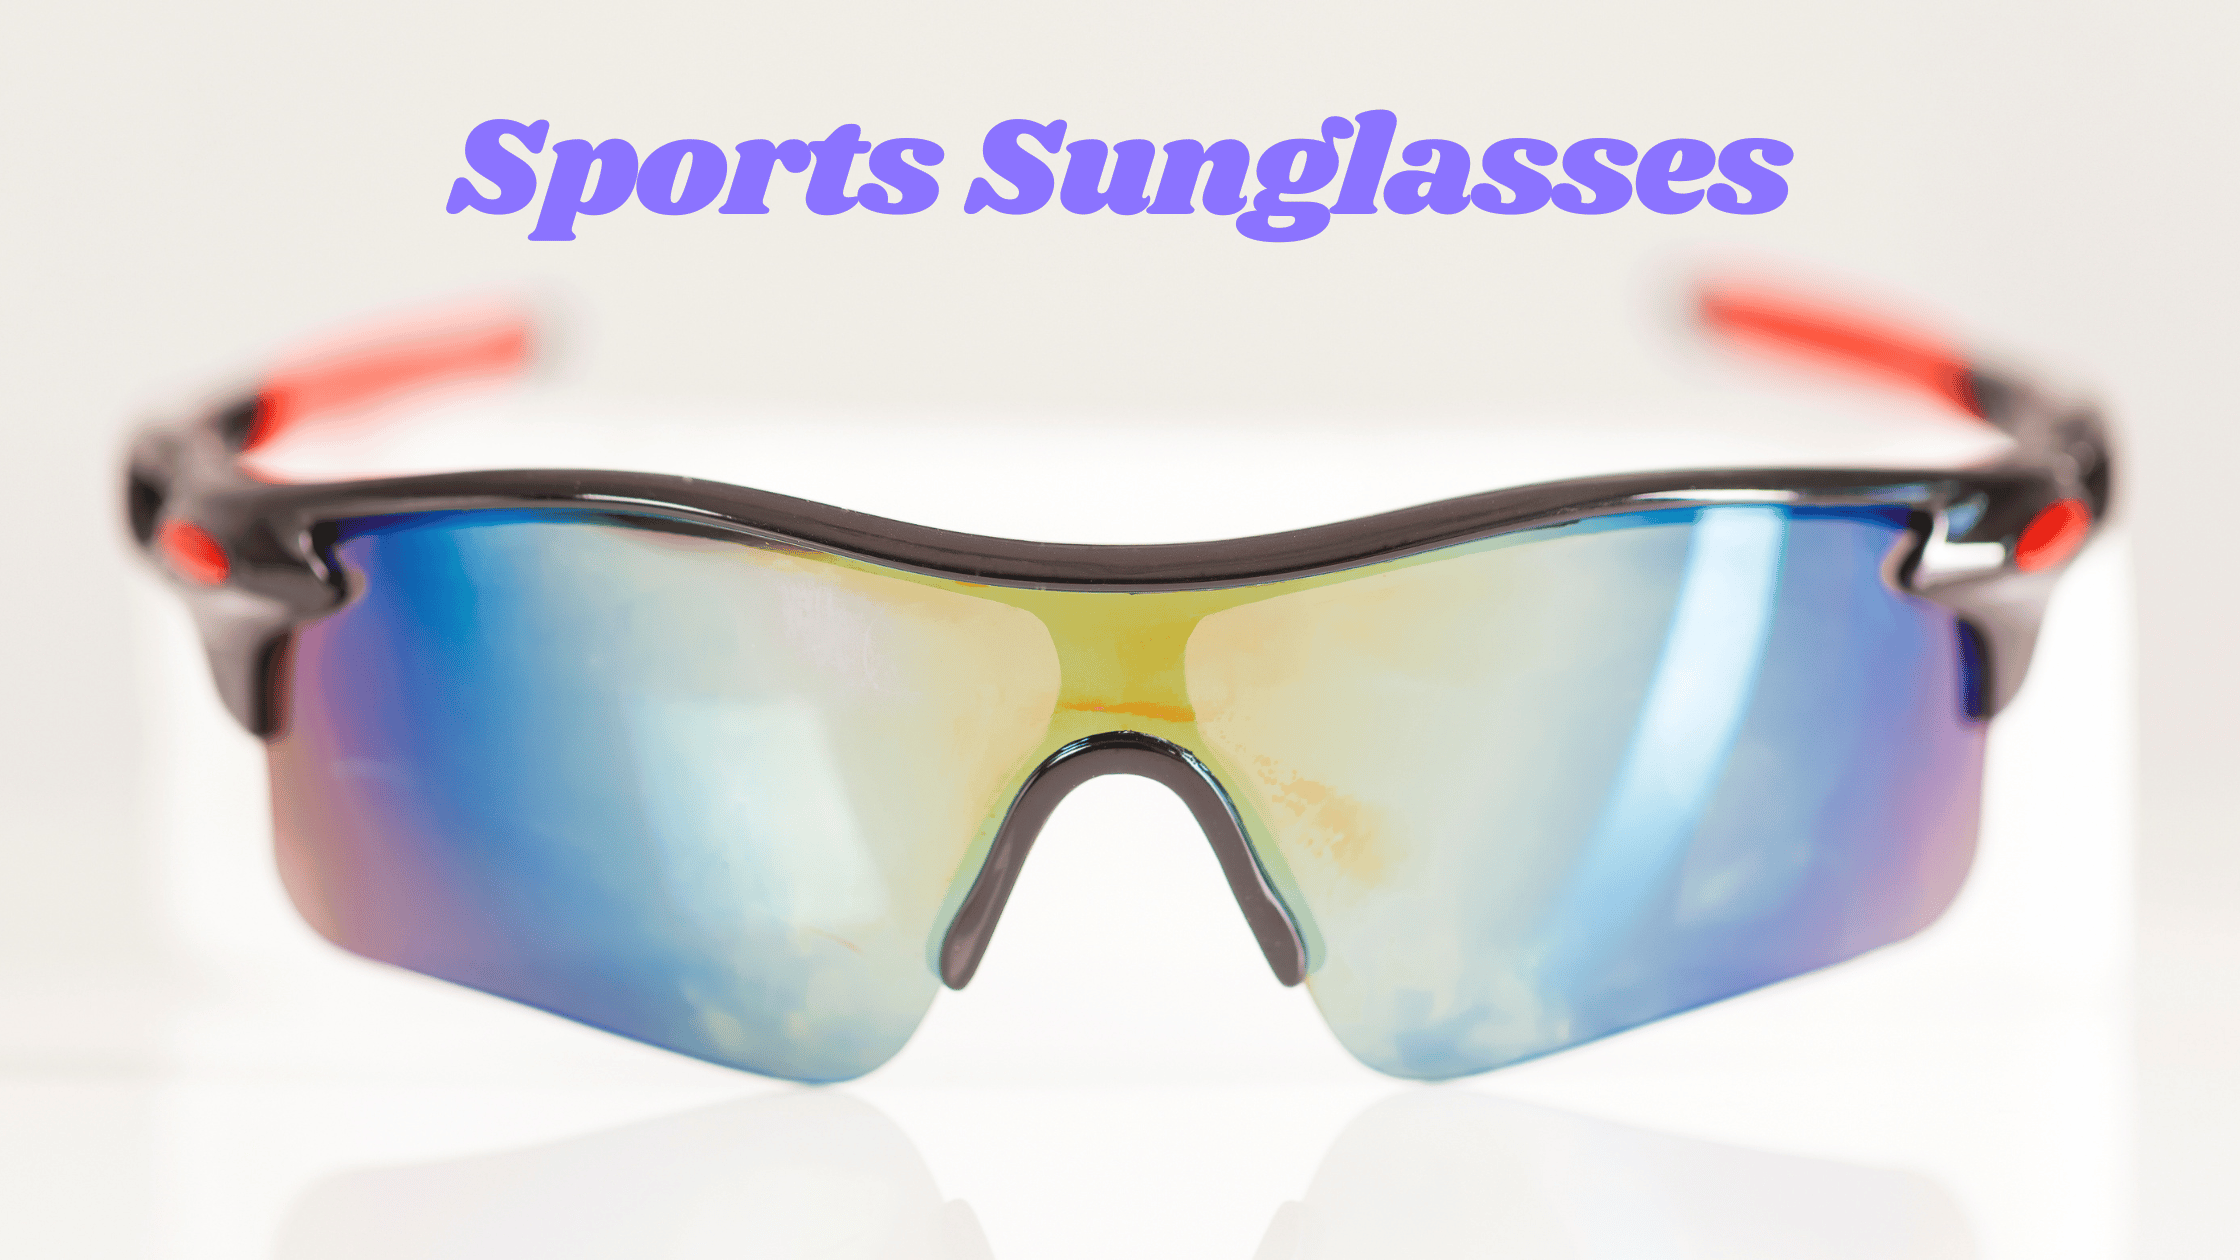 Tips for Taking Care of Your Sports Sunglasses